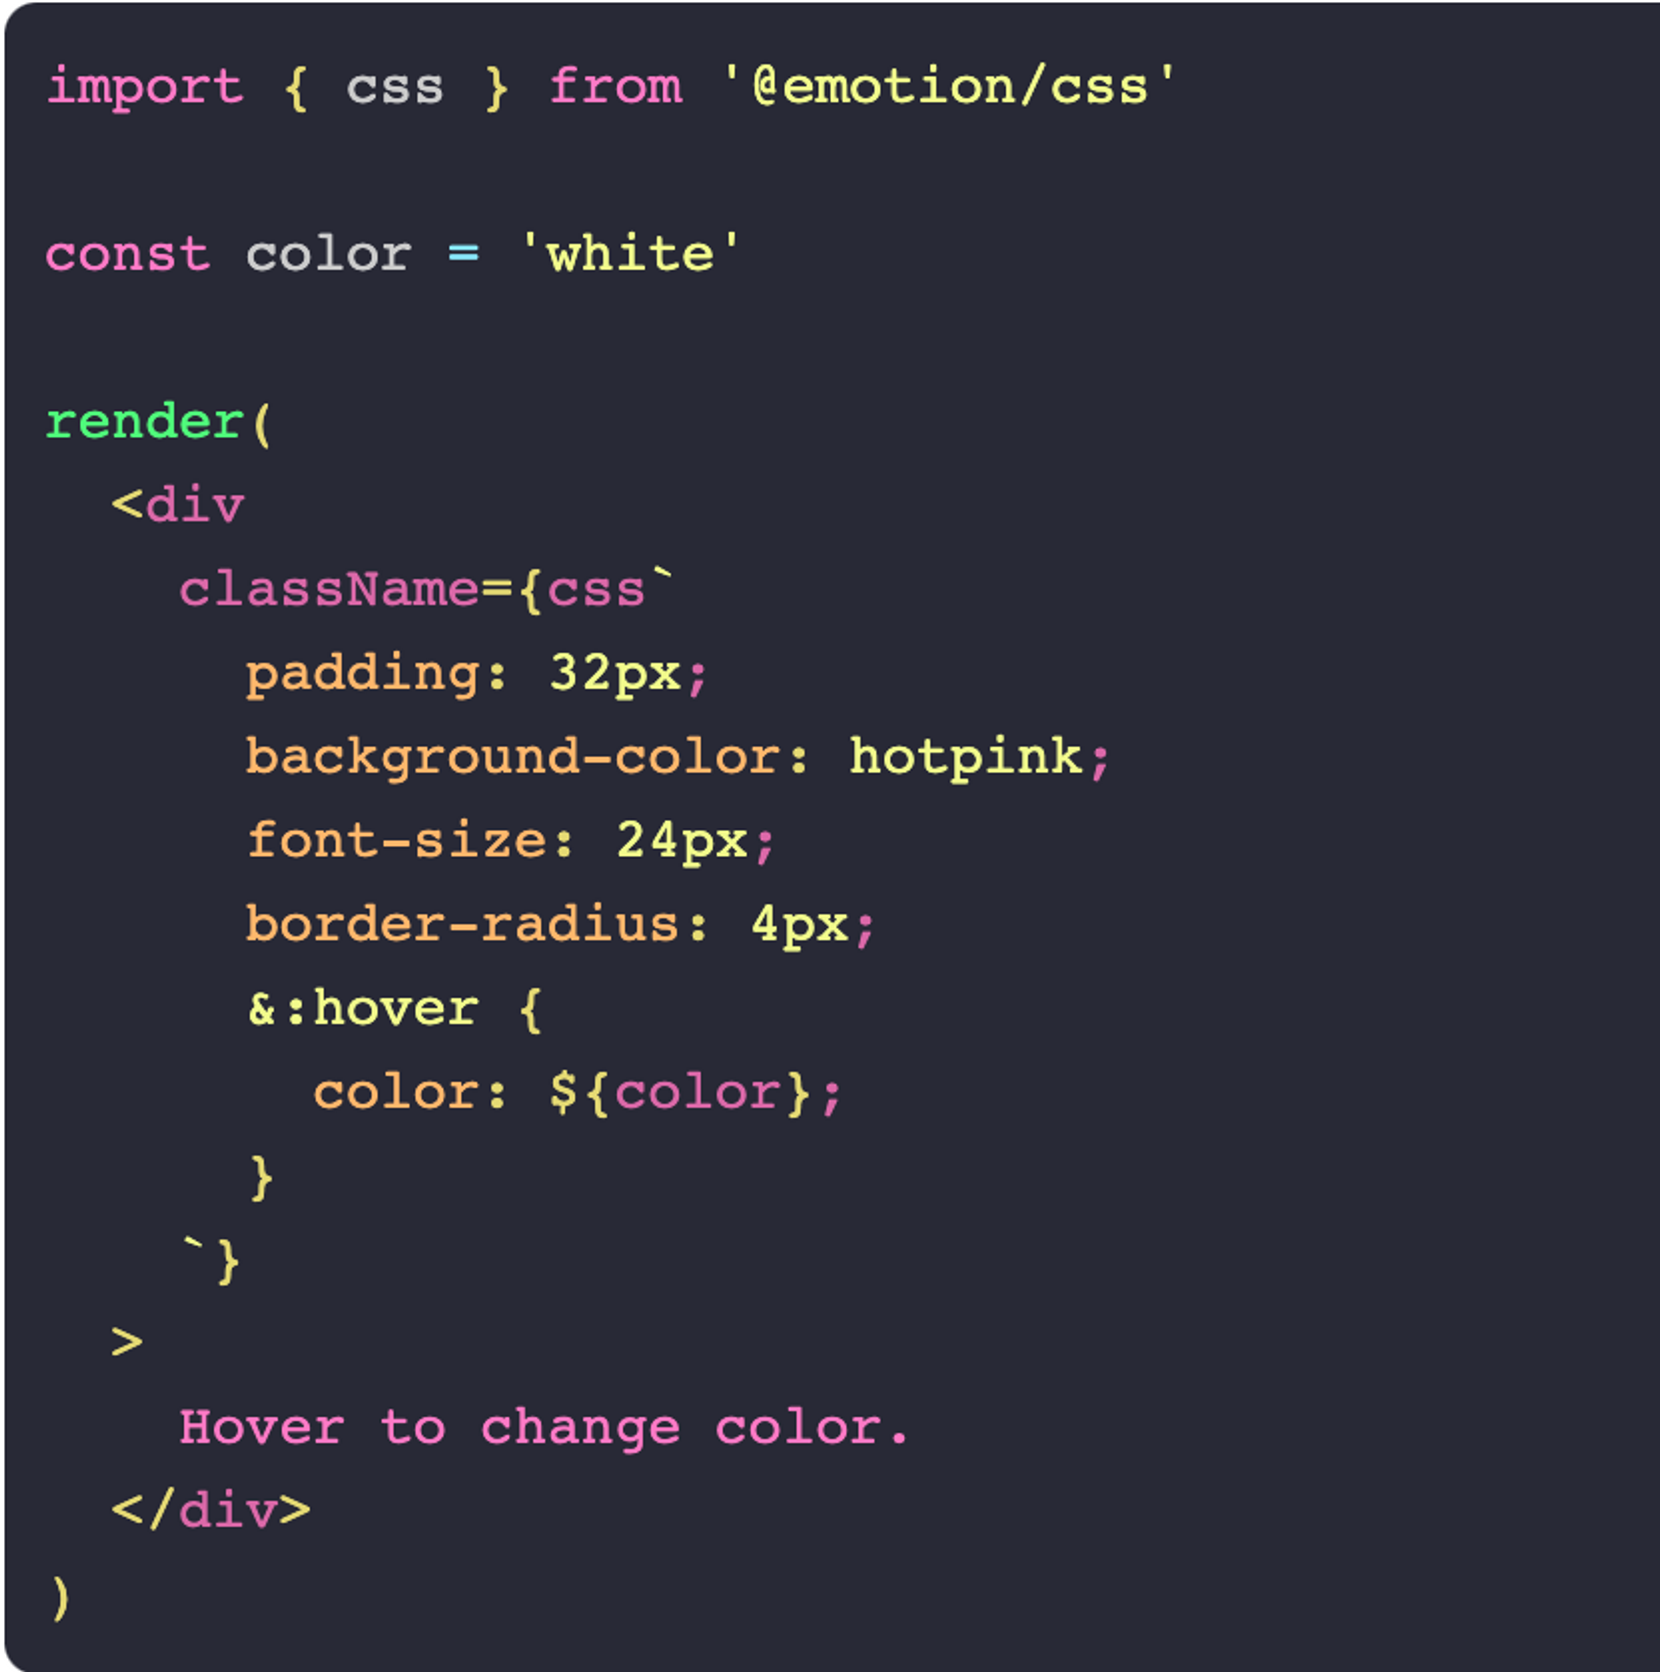 css in js